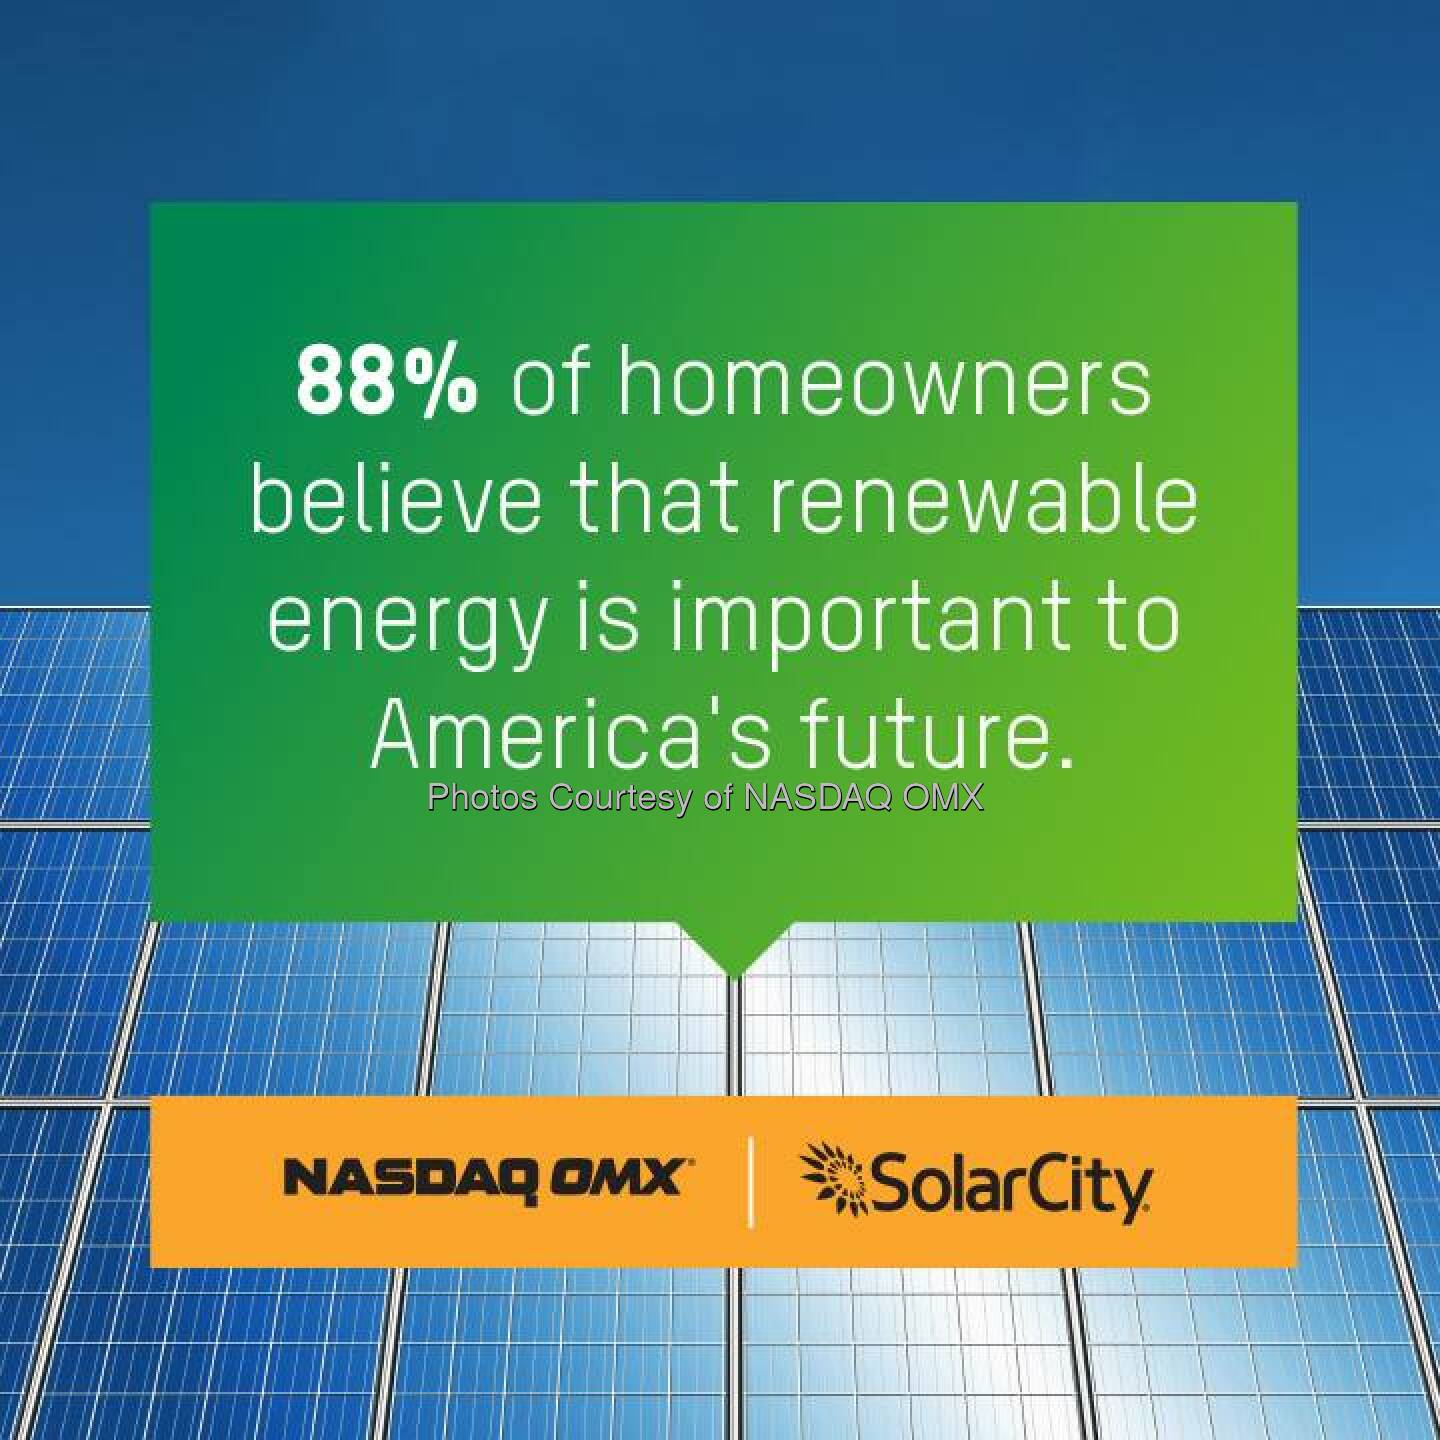 Did you know that 88% of homeowners believe renewable energy is important to America's future? @NASDAQ + @Solarcity  Source: http://facebook.com/NASDAQ